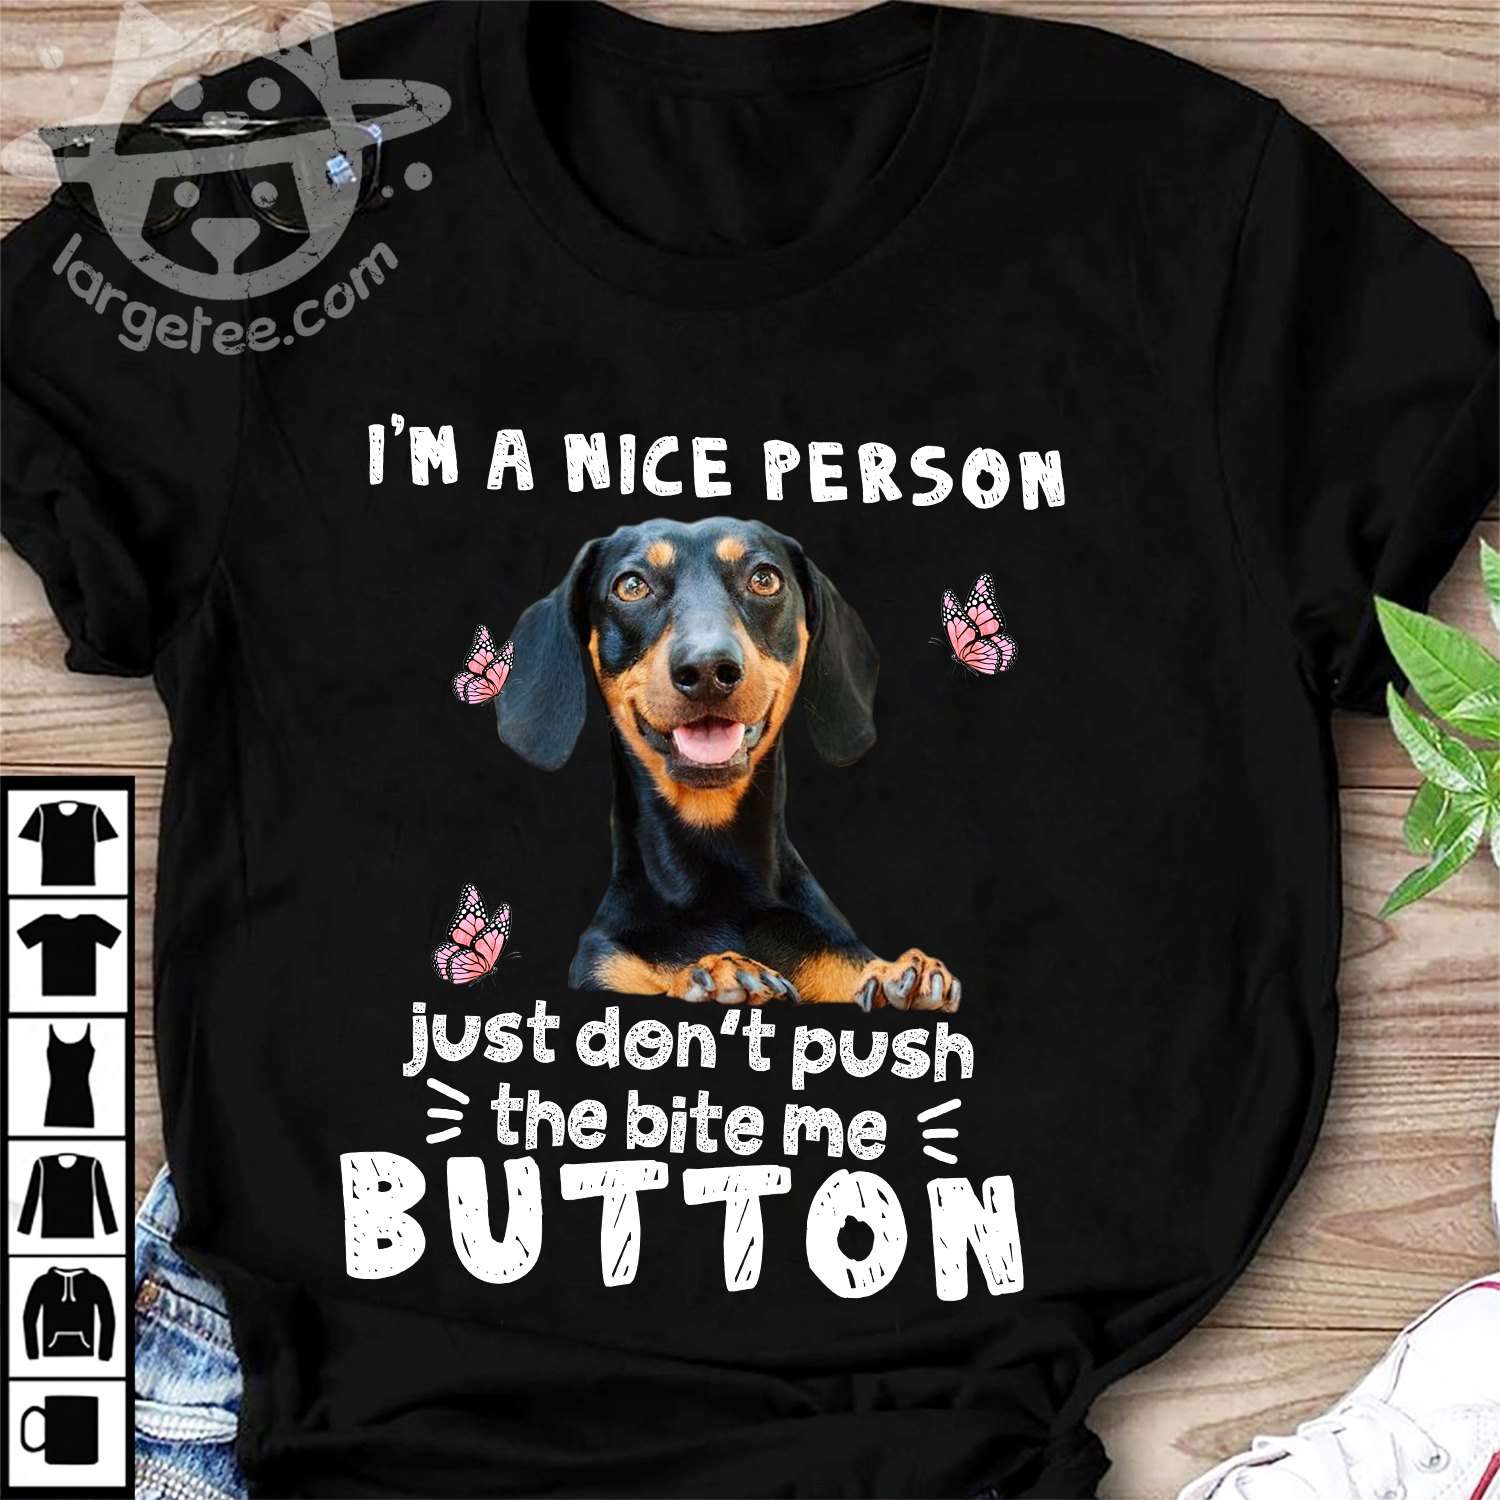 Dachshund Dog - I'm a nice person just don't oush the bite me button